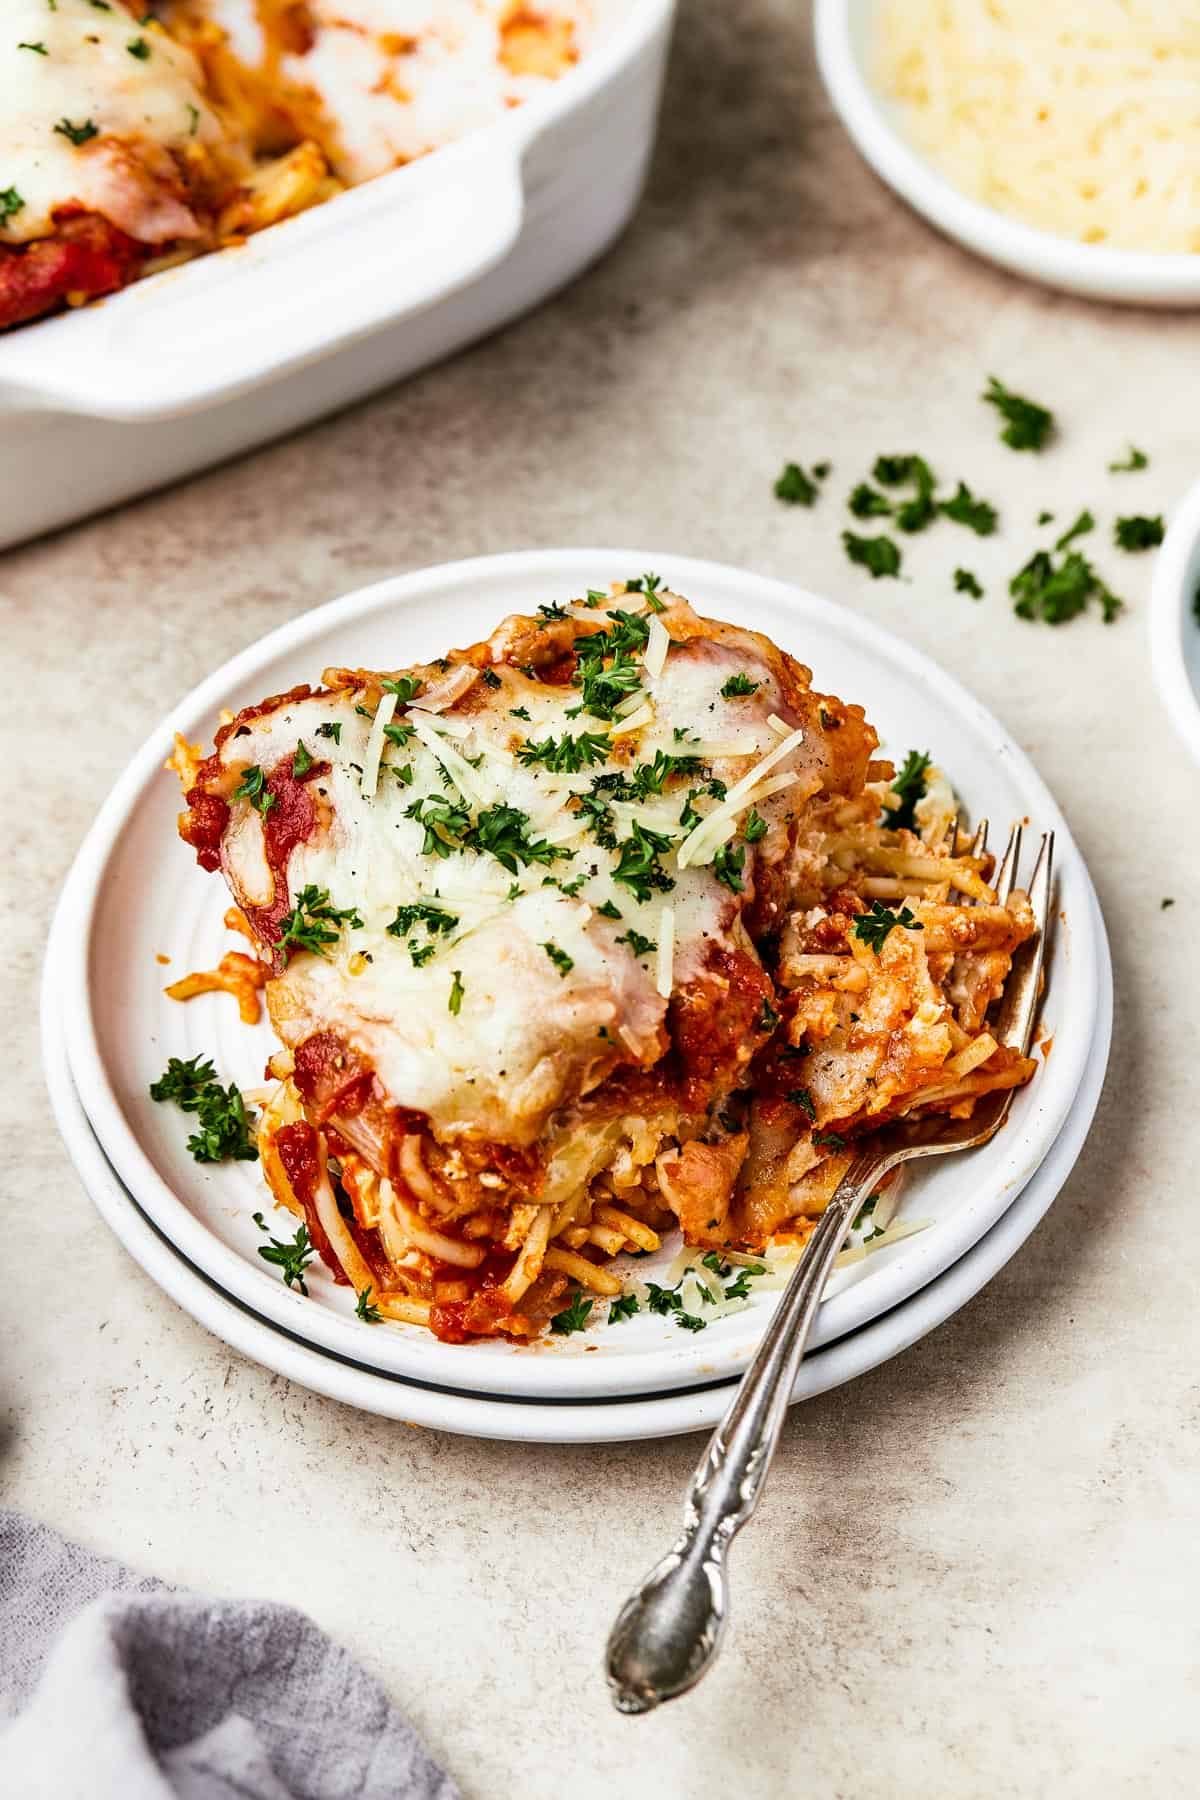 A square of baked spaghetti on a plate, garnished with parsley.